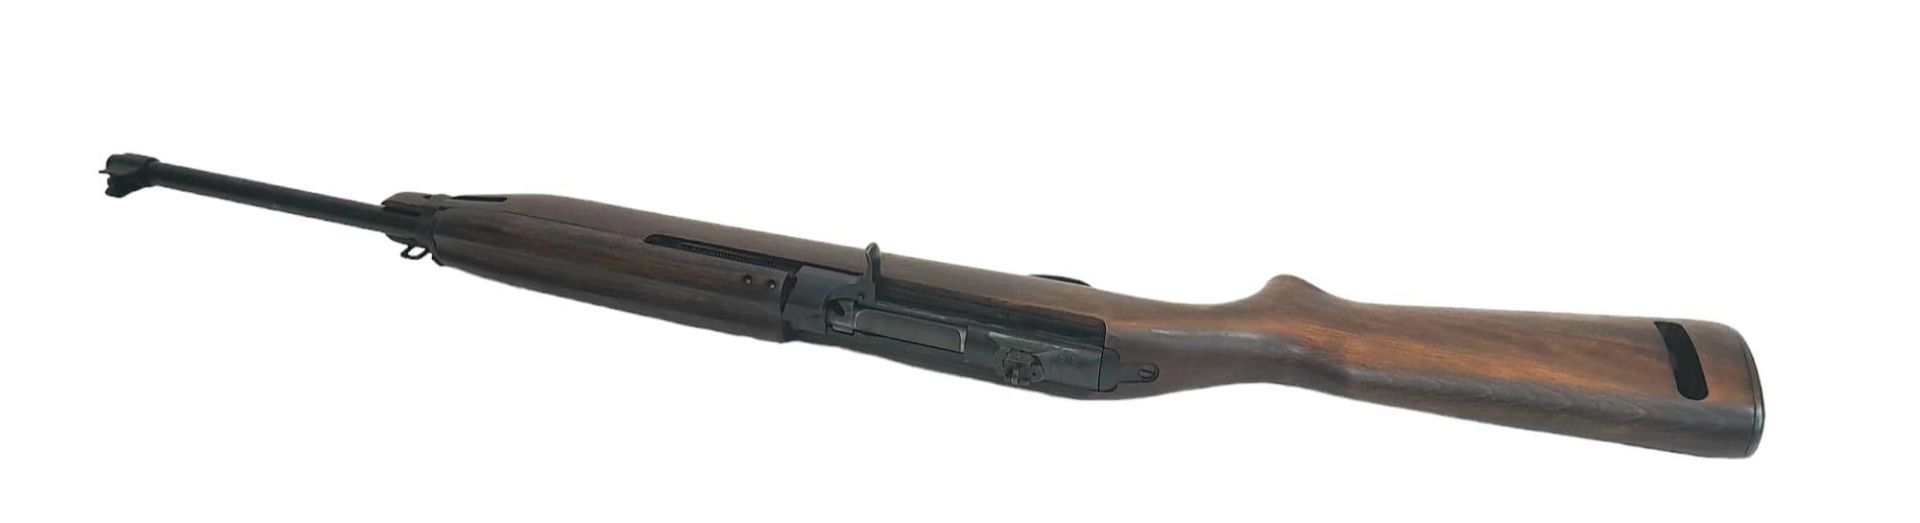 A Deactivated Winchester M1 Carbine Self Loading Rifle. Used by the USA in warfare from 1942-73 this - Bild 4 aus 12